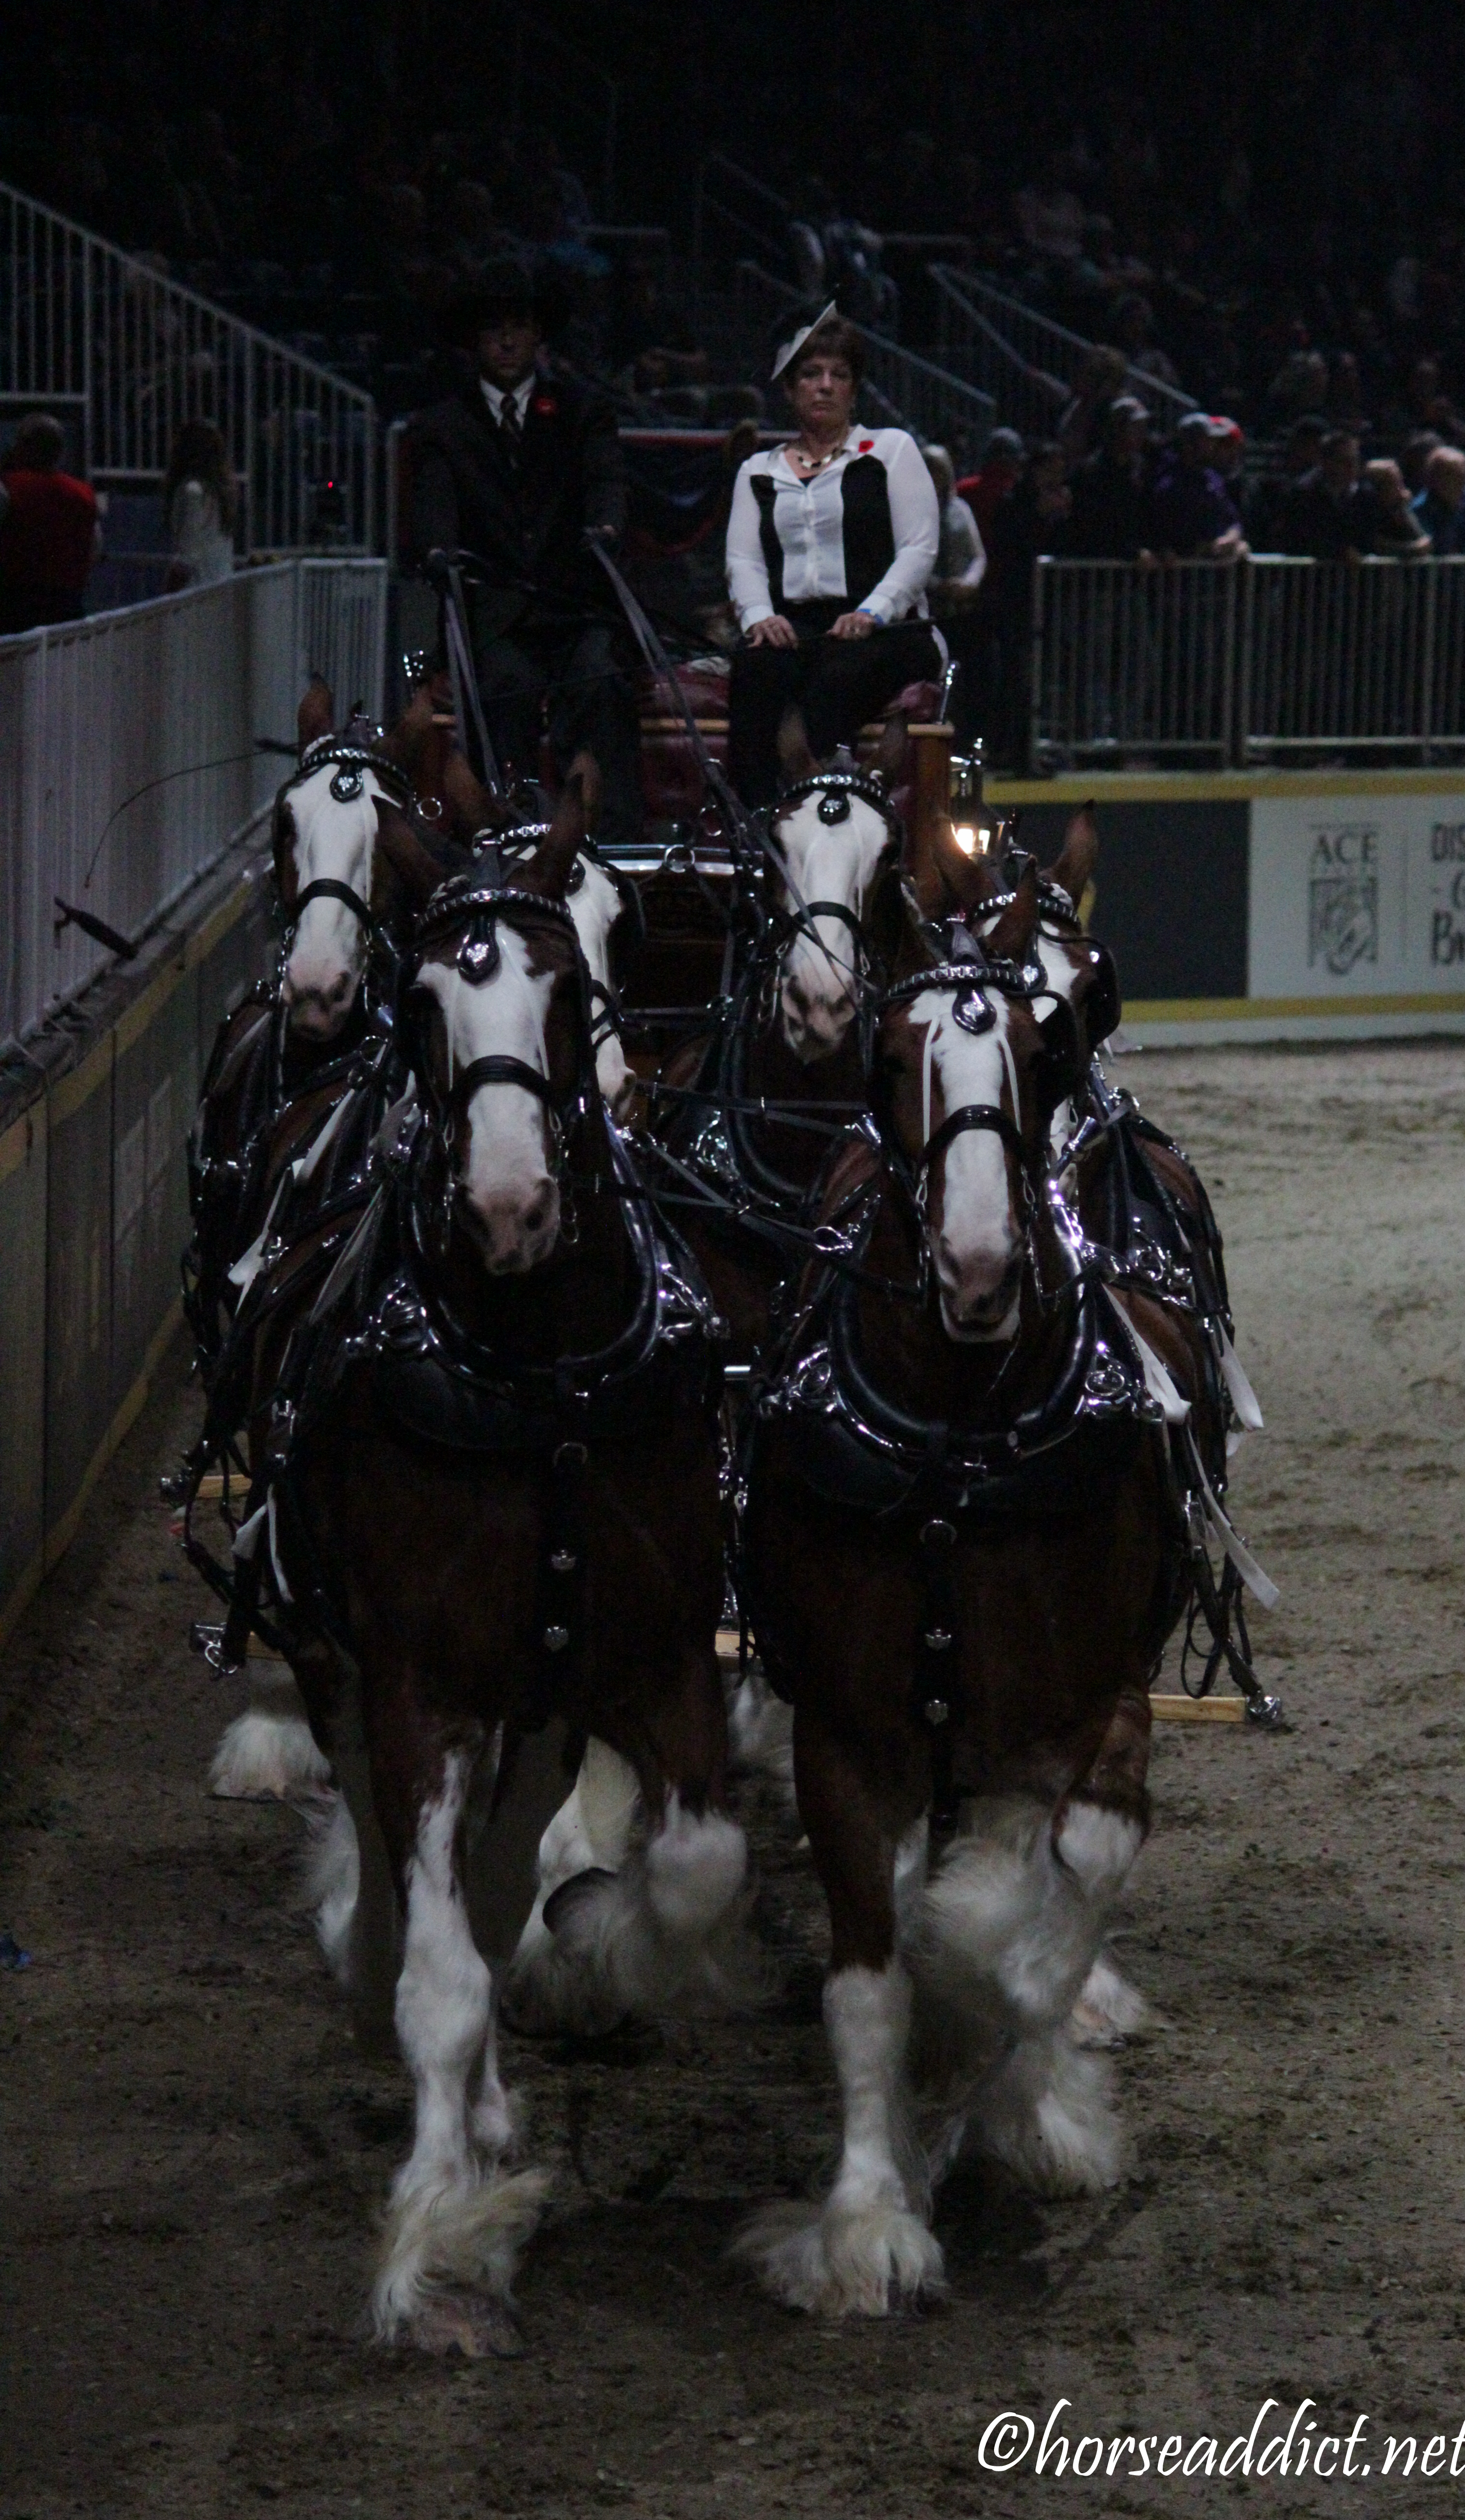 Into the Stadium: The Clydesdale Six Horse Hitch